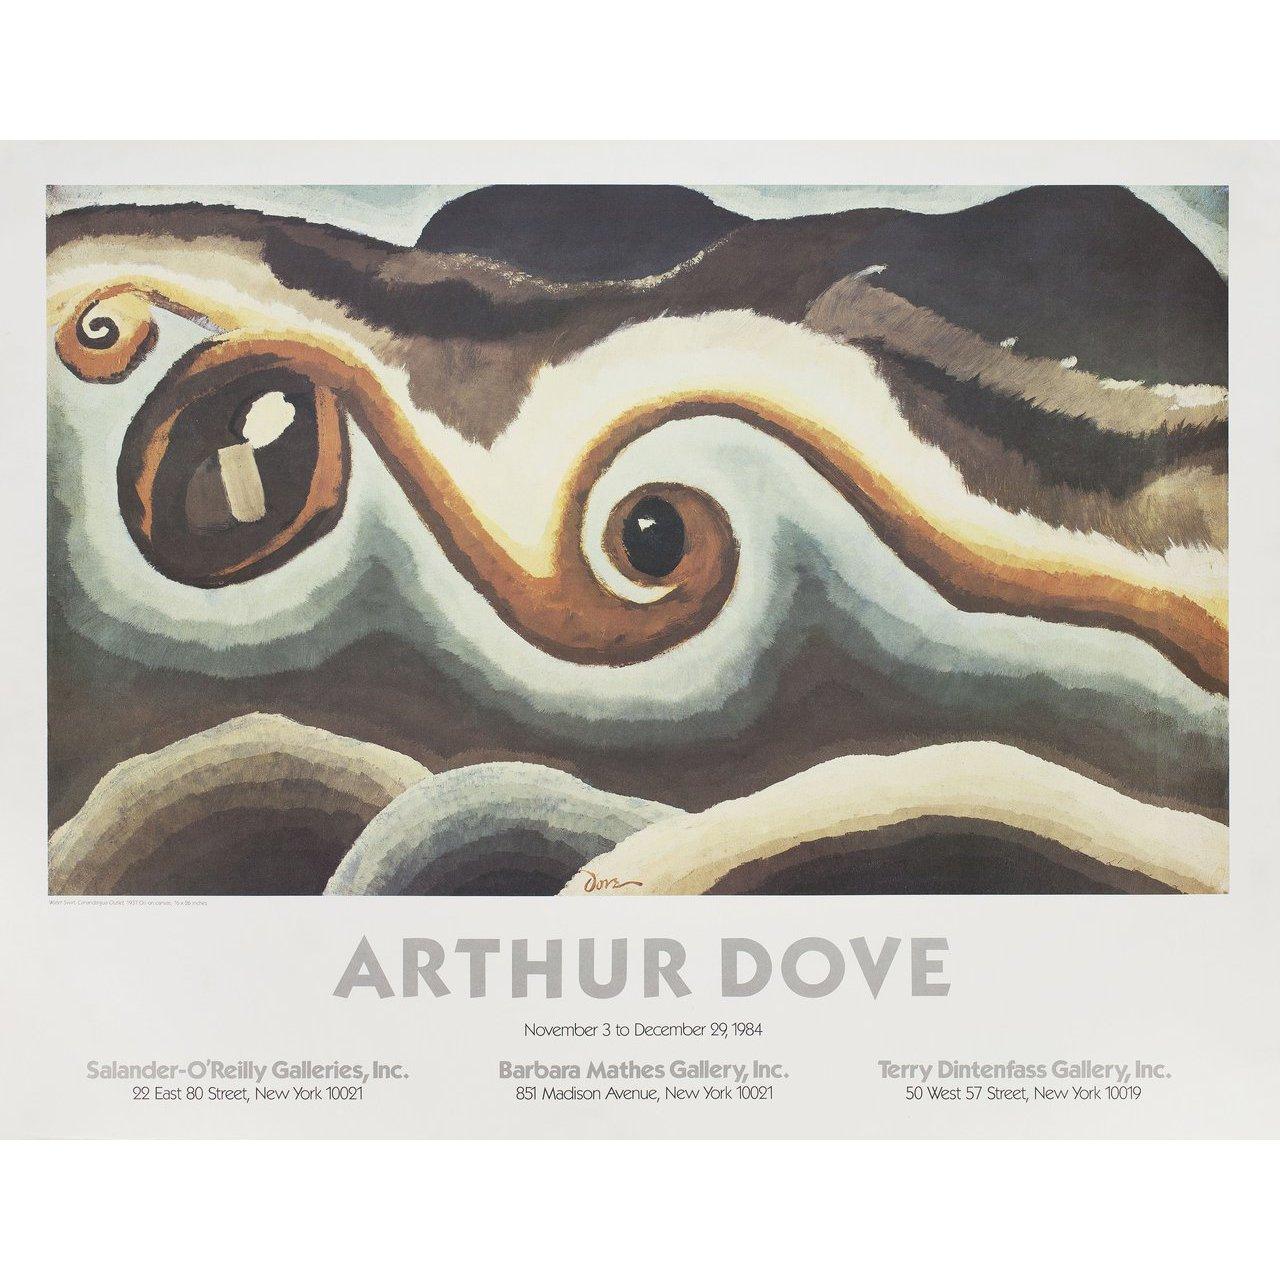 Original 1984 U.S. poster for the exhibition Arthur Dove. Very Good-Fine condition, rolled. Please note: the size is stated in inches and the actual size can vary by an inch or more.
